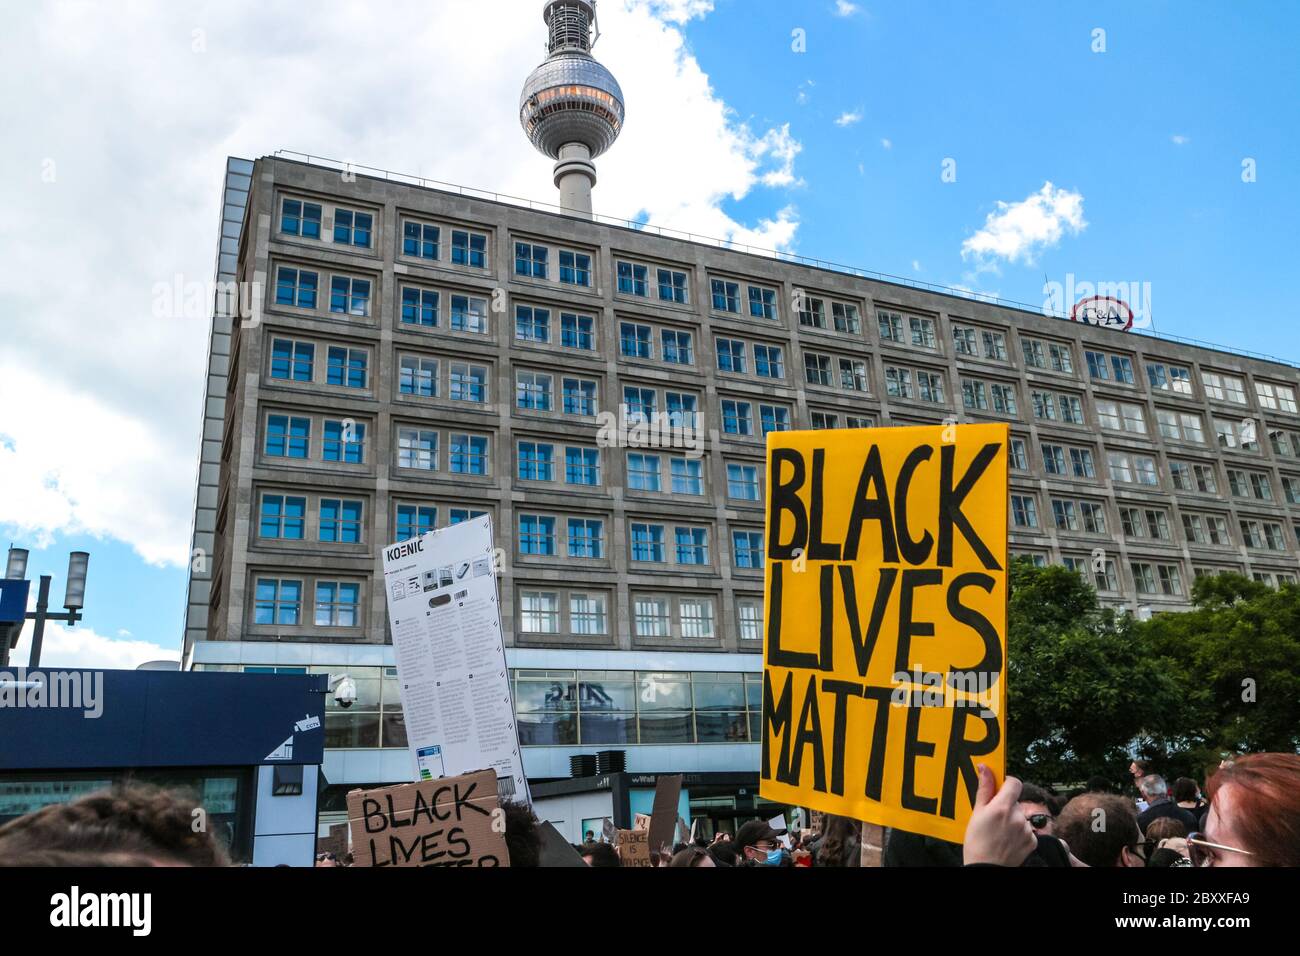 'Black lives matter' sign at a Black Lives Matter protest on Alexanderplatz Berlin, Germany, following the death of George Floyd by police violence. Stock Photo